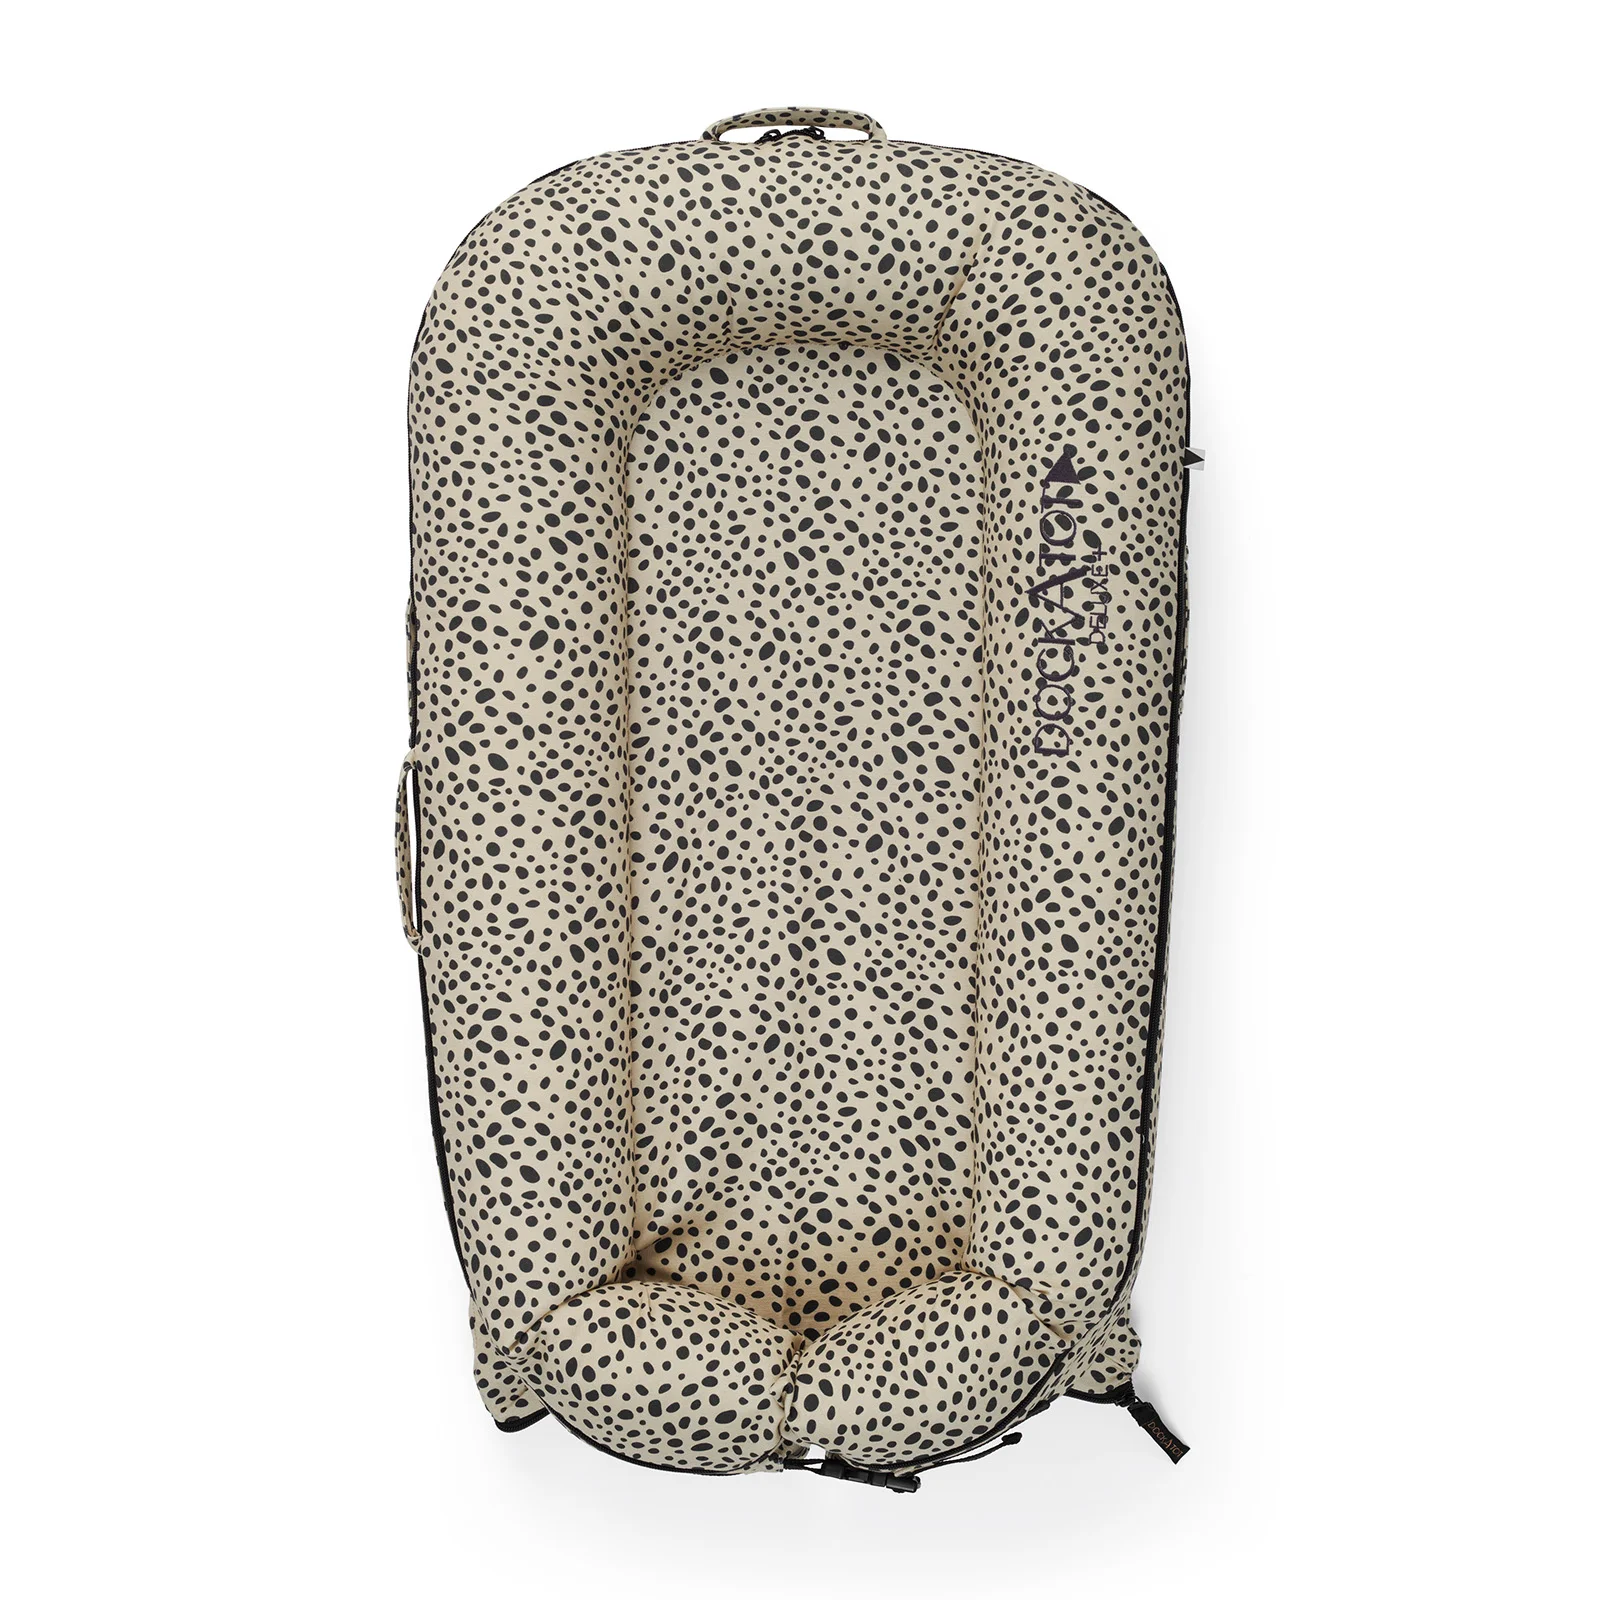 DockATot Deluxe + Pod for 0-8 Months - Painted Spots Image 1